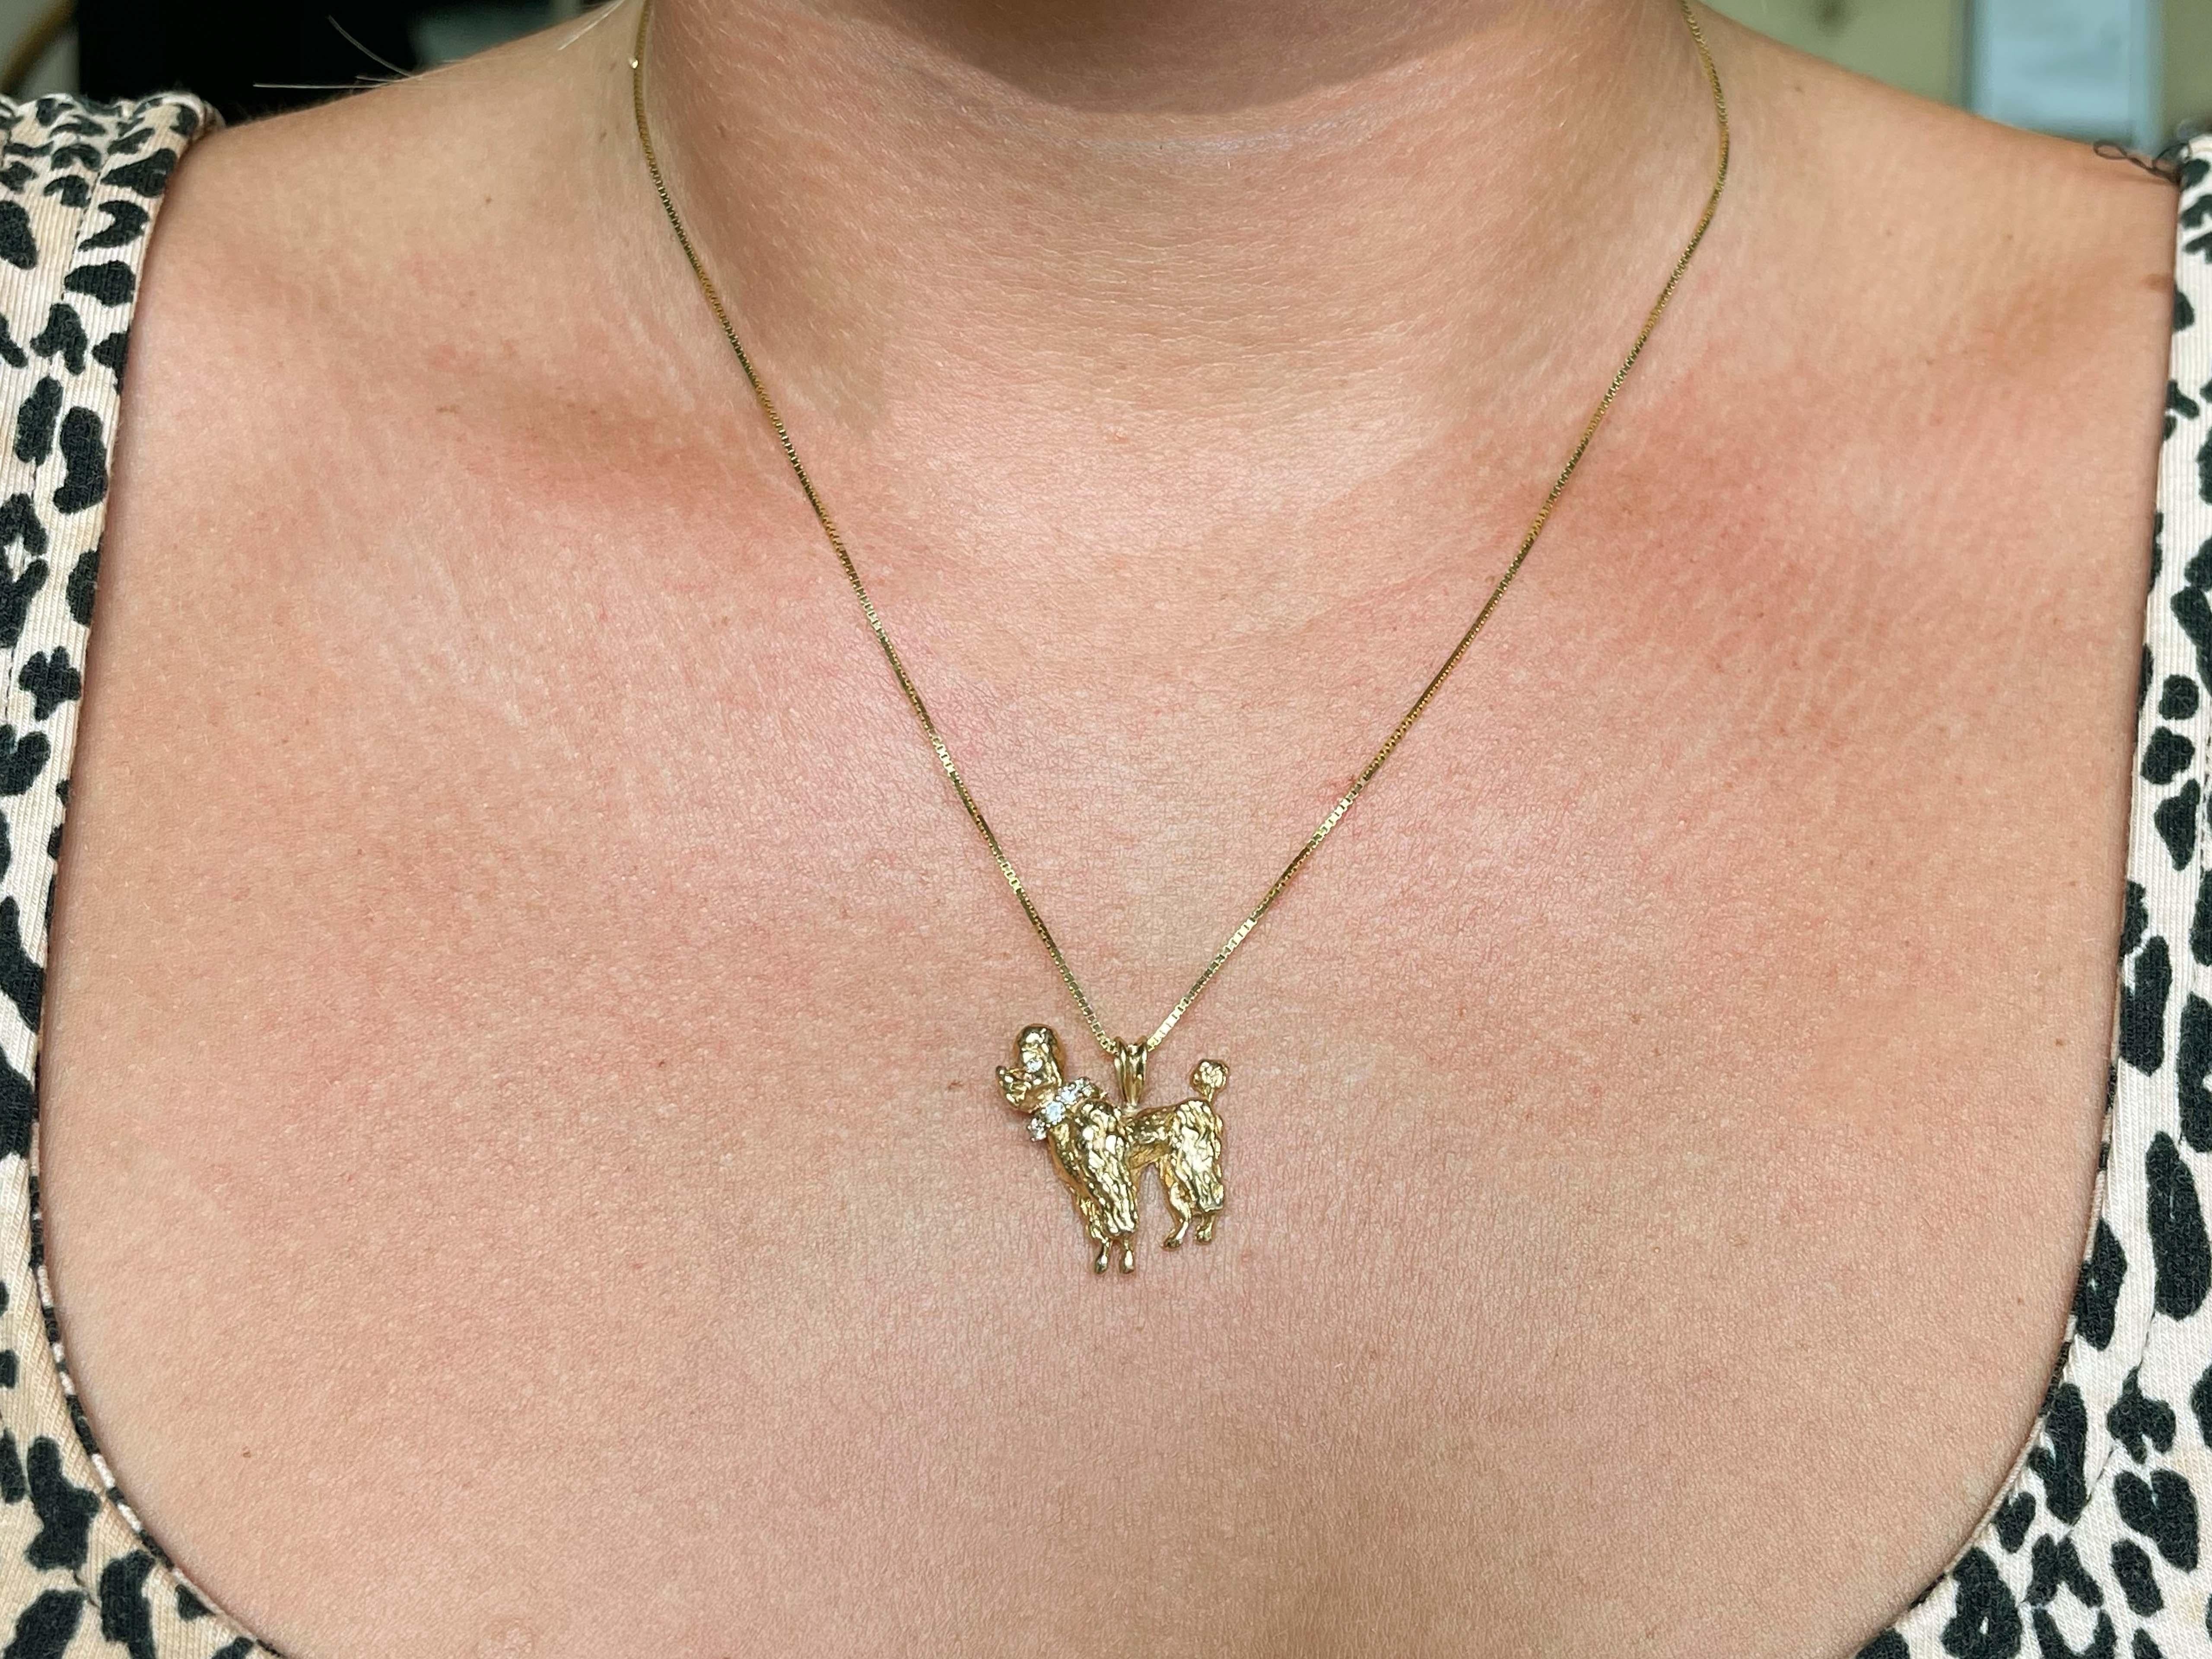 Item Specifications:

Necklace Metal: 14k Yellow Gold

Total Weight: 8.1 Grams

Stamped: 